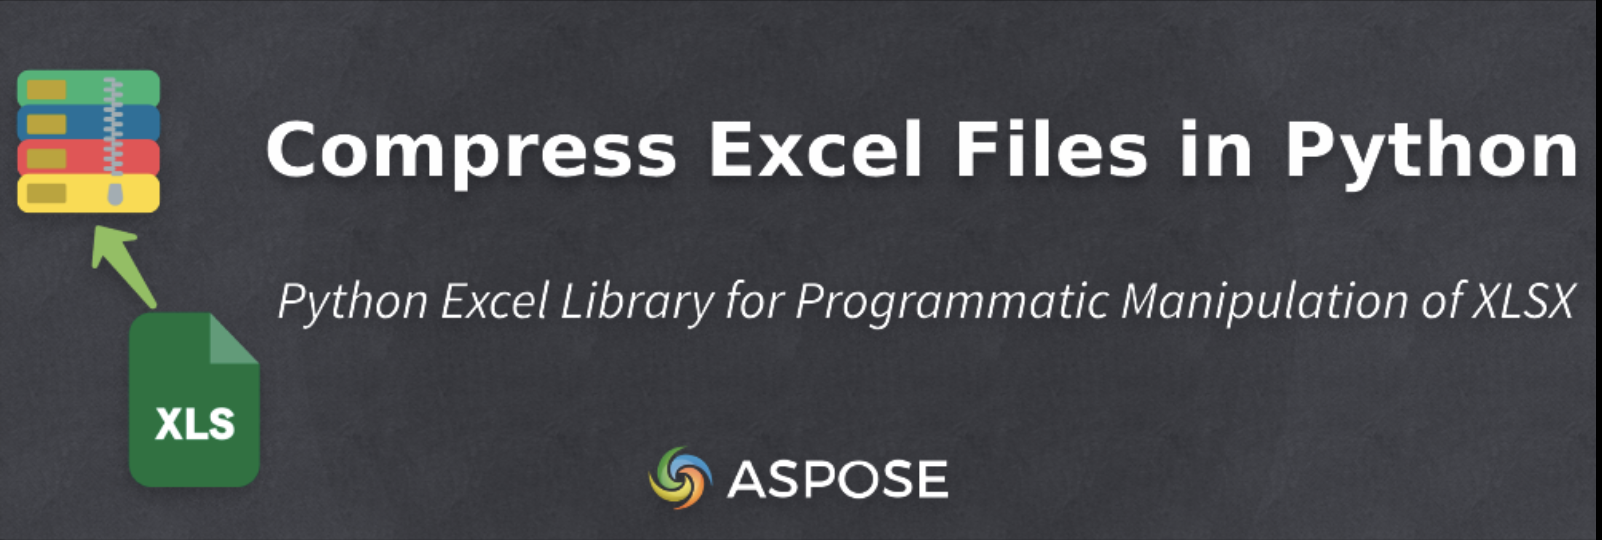 Compress Excel Files in Python